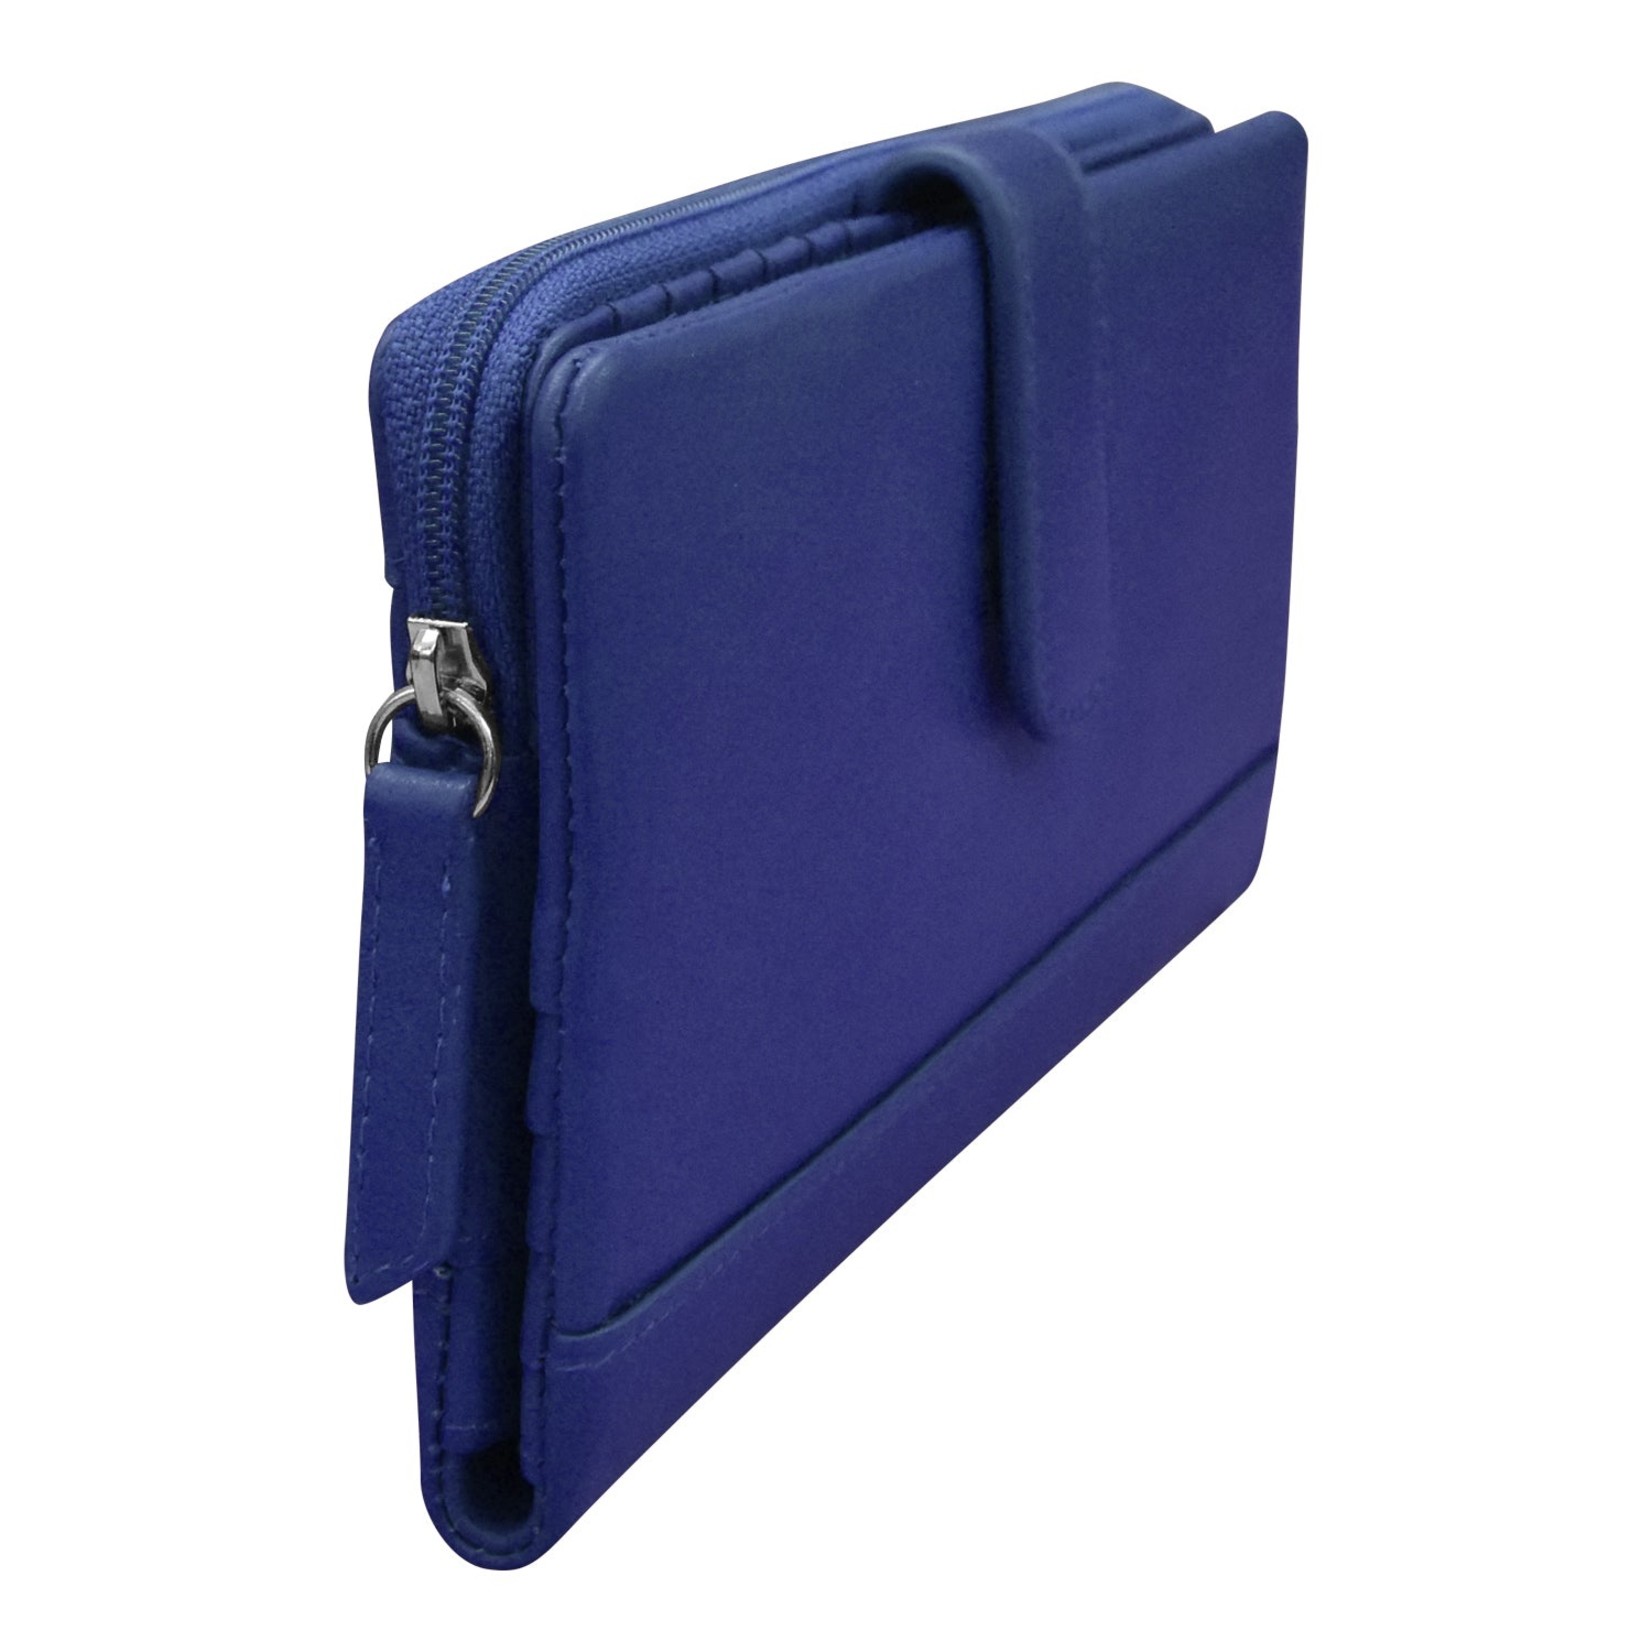 Leather Handbags and Accessories 7420 Cobalt - RFID Smartphone Wallet